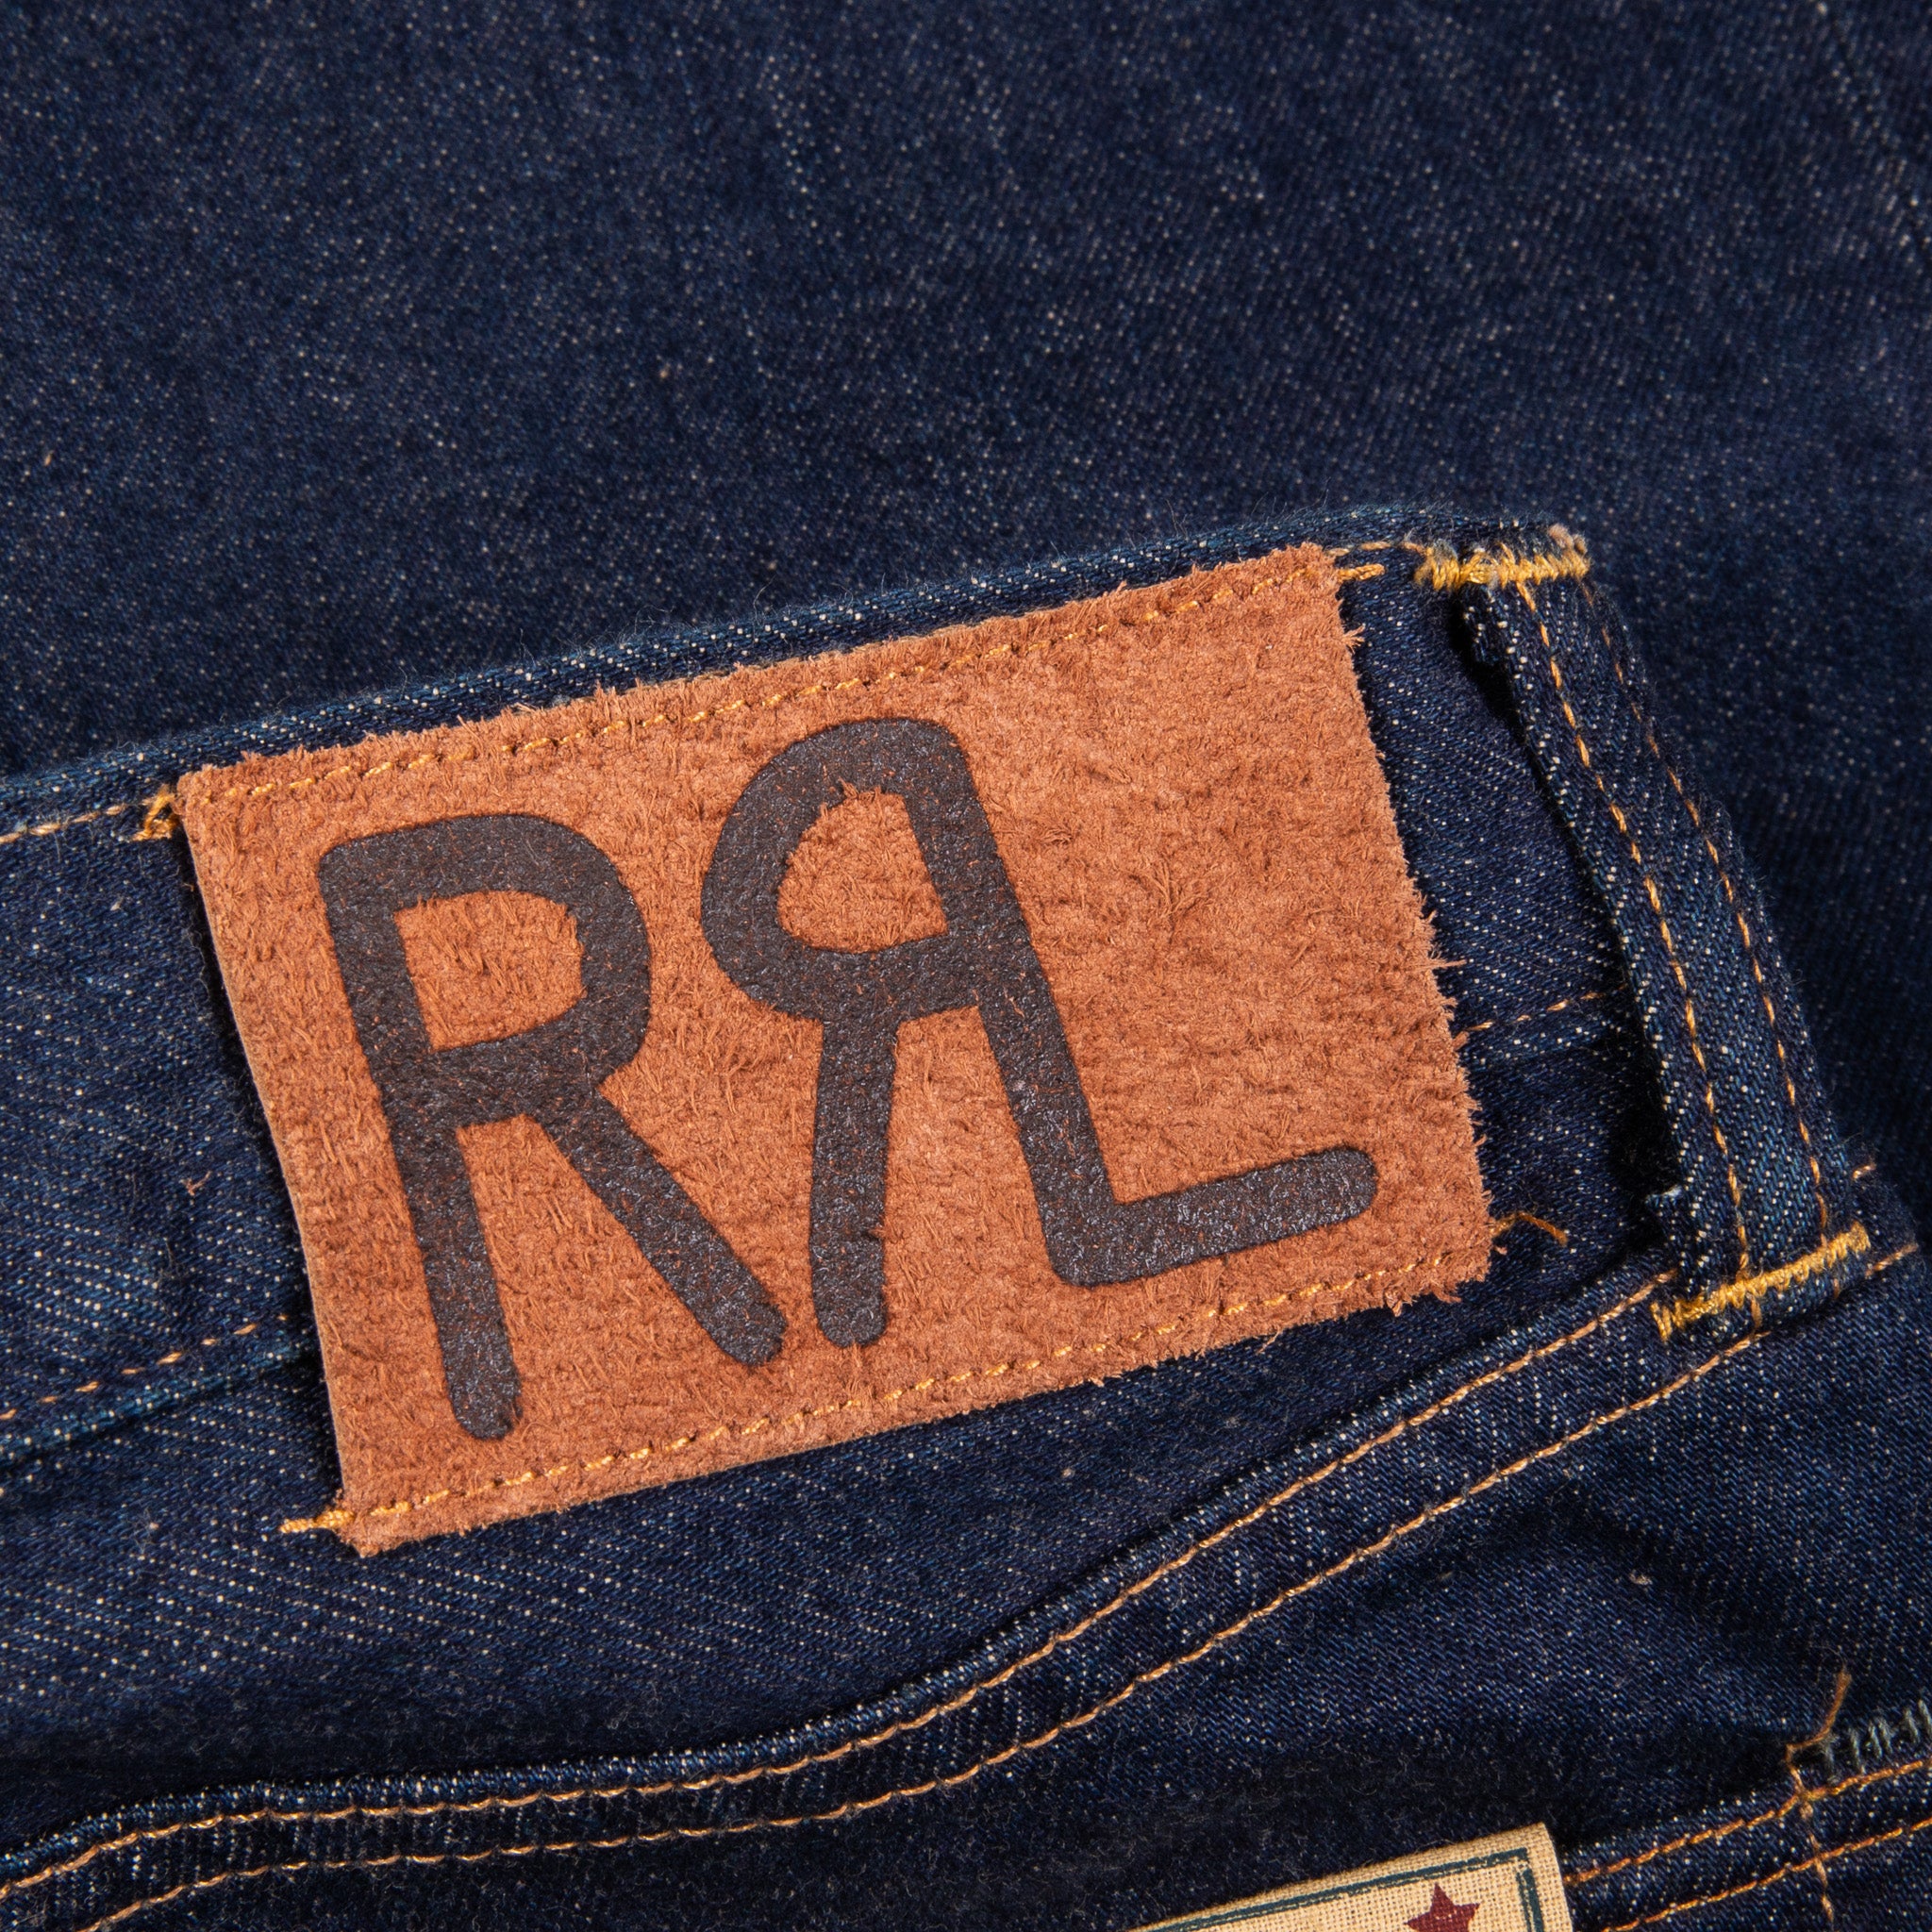 RRL Low Straight Once Washed